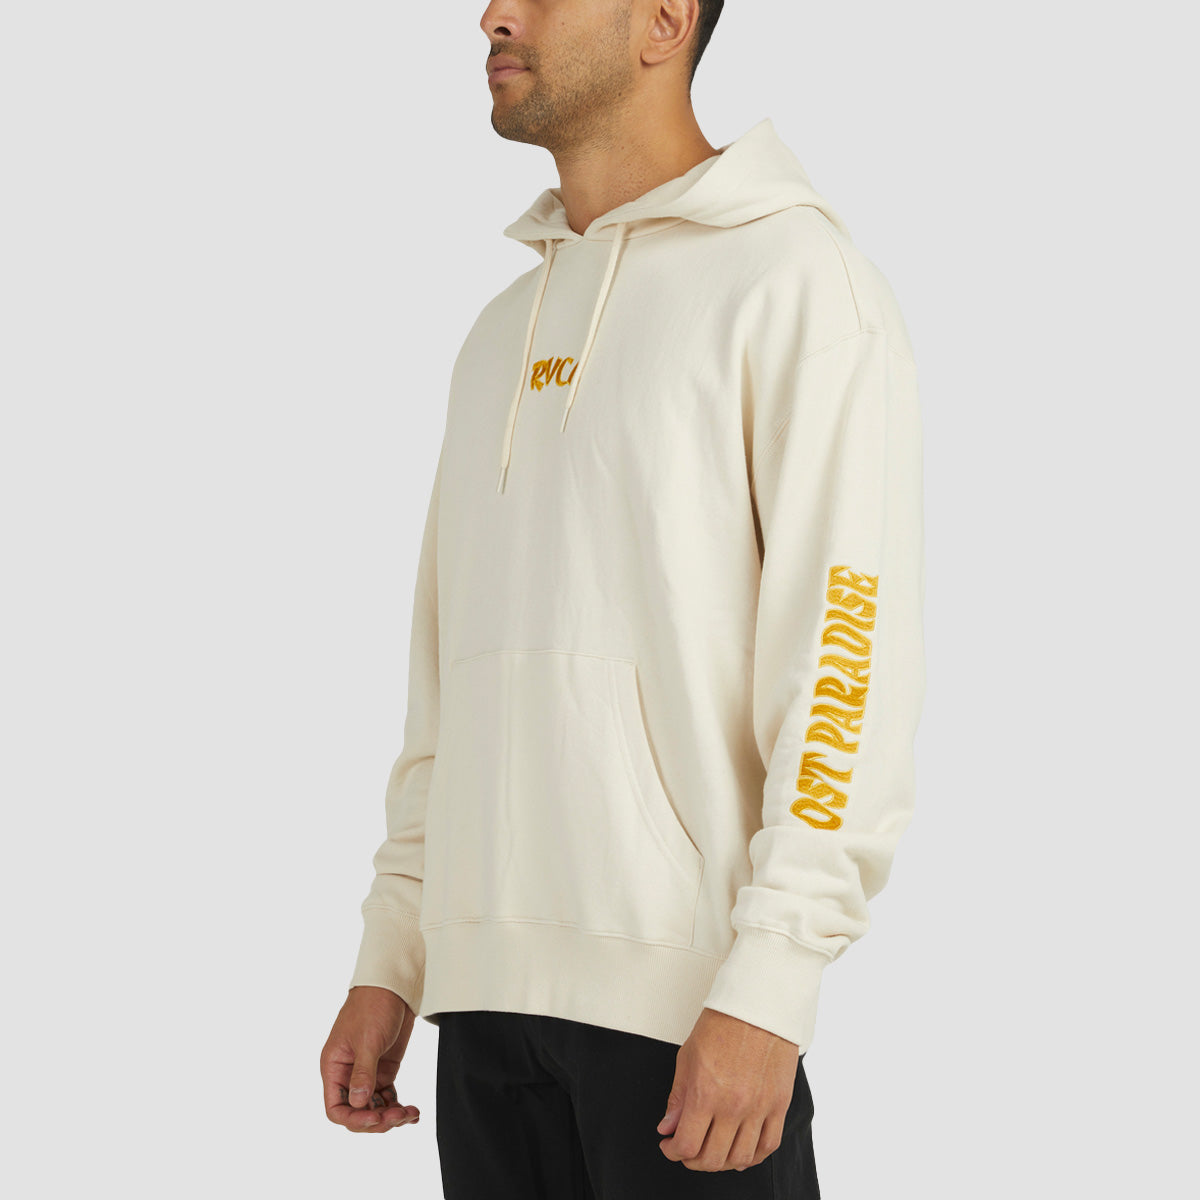 RVCA Lost Paradise Pullover Hoodie Natural